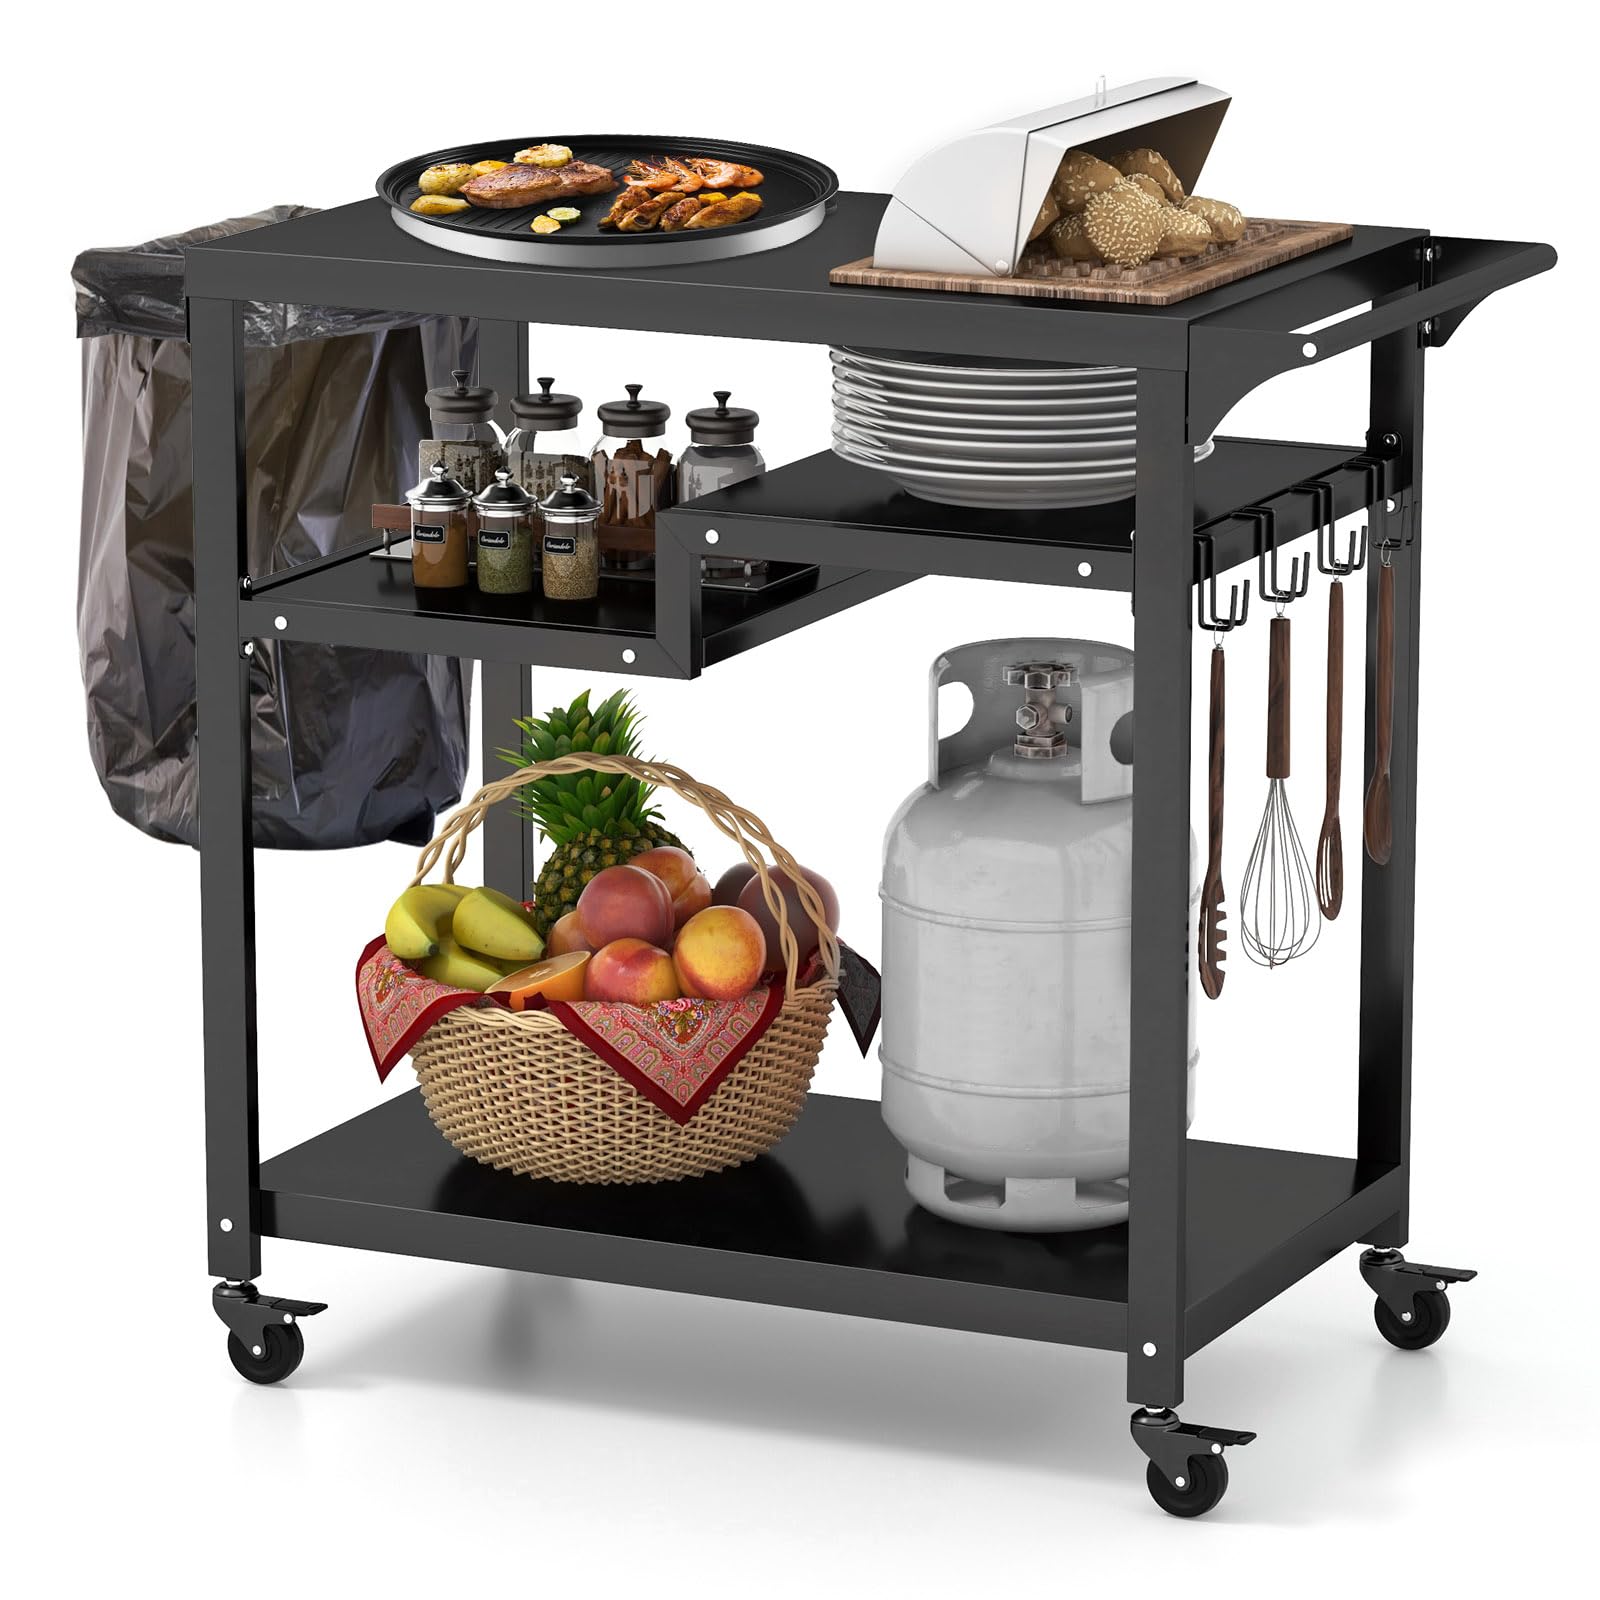 Giantex Outdoor Grill Cart - Pizza Oven Stand Table with Lockable Wheels